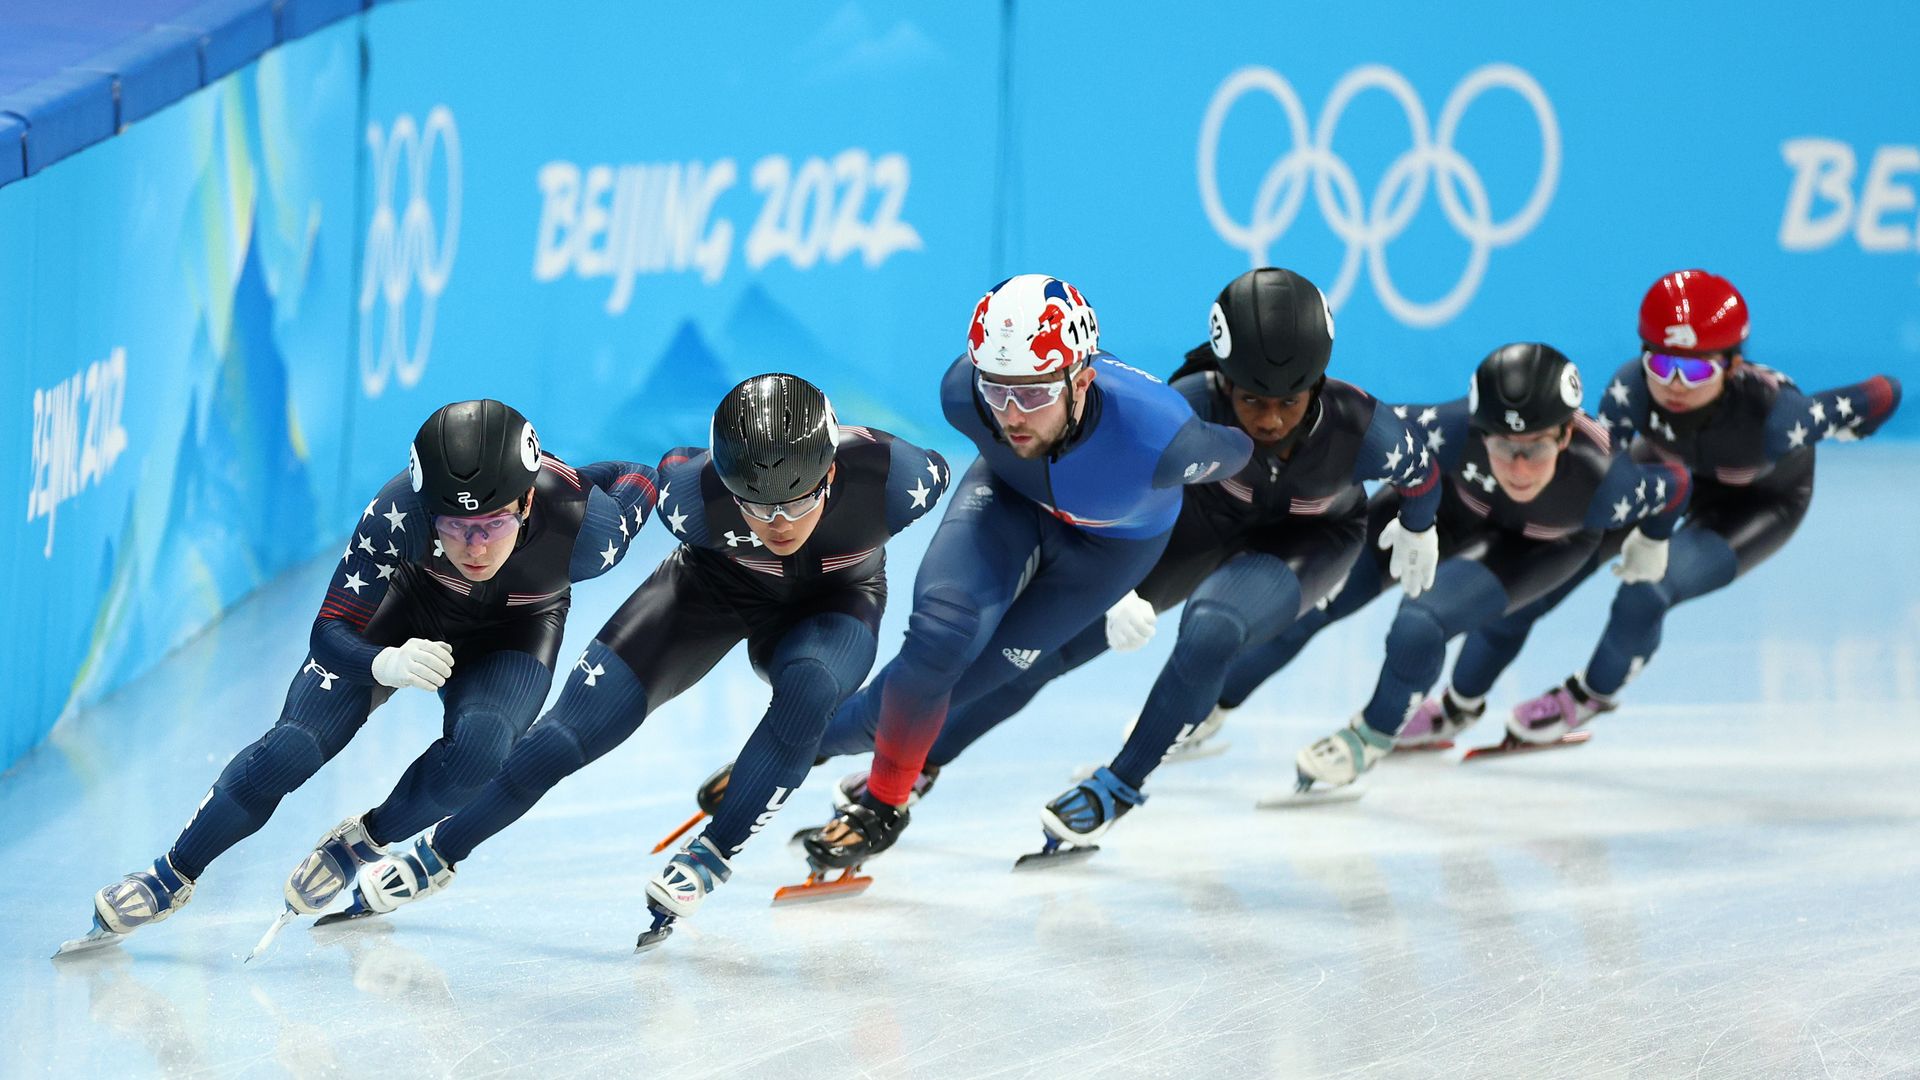 Photo of Team USA short track speed skaters on the ice skating in a line formation